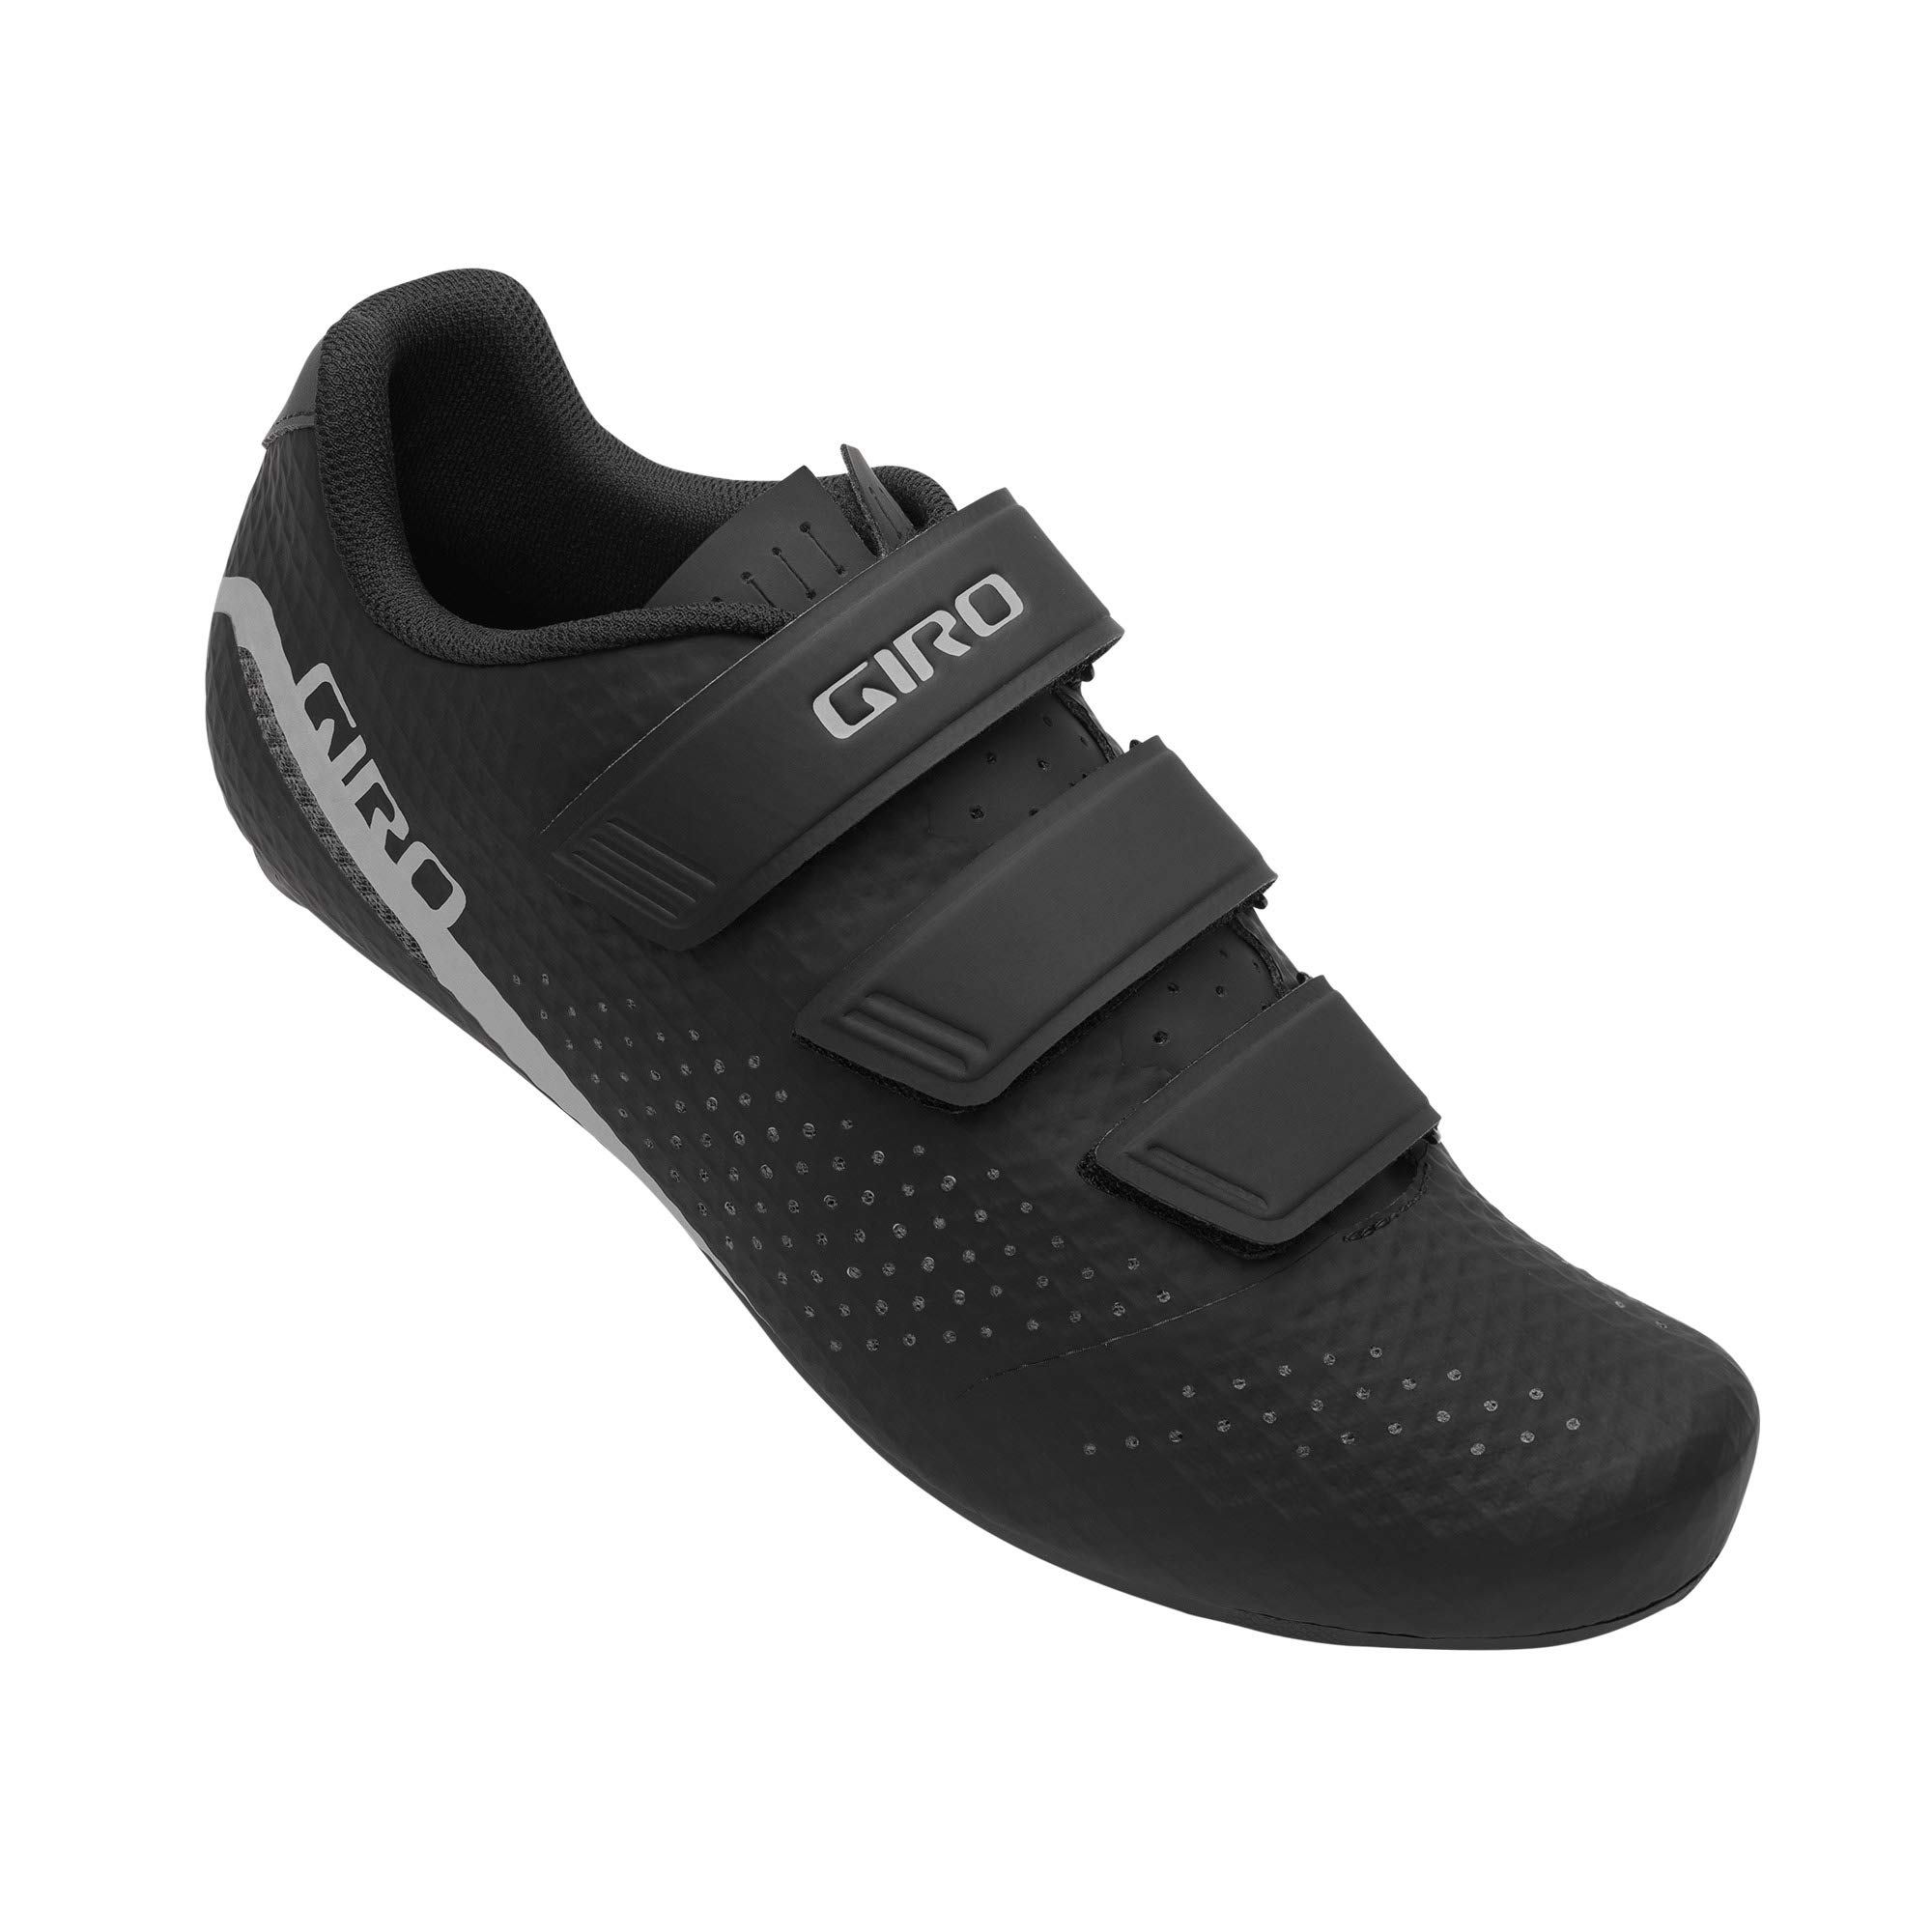 Giro Stylus Men's Indoors and Outdoors Clipless Road Cycling Shoes - No Frills, Just The Fundamentals Done Right